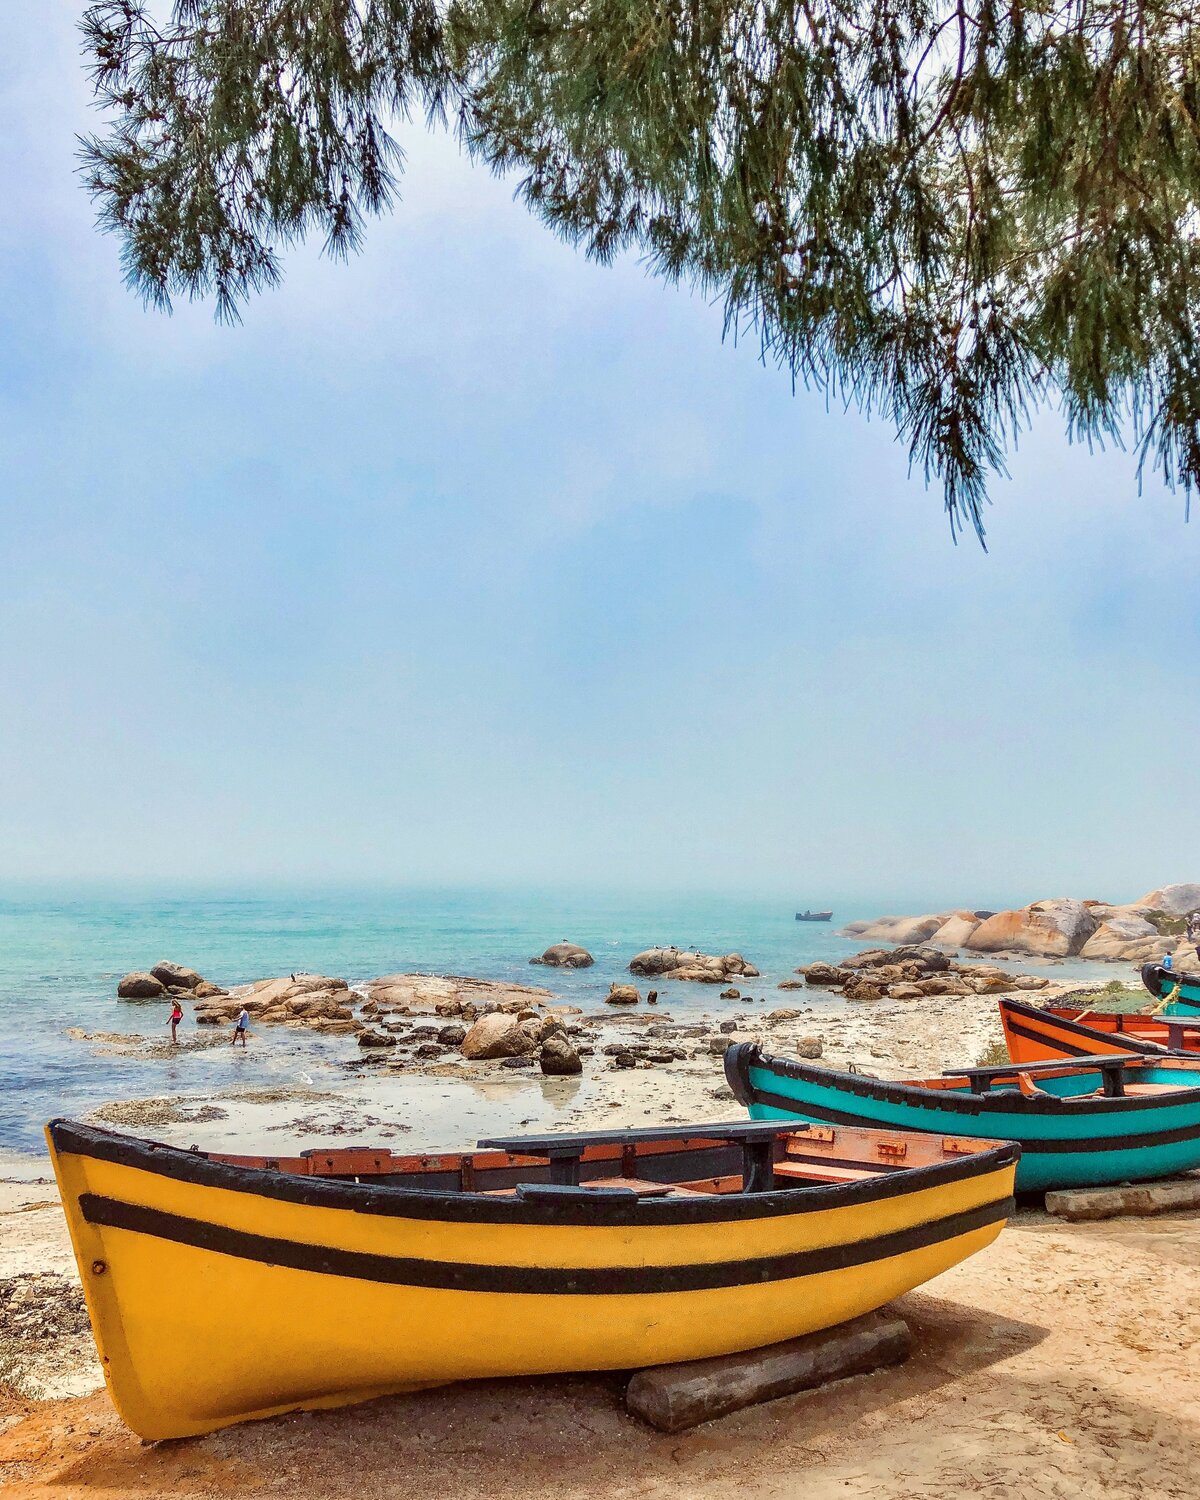 Colorful boats on the beach